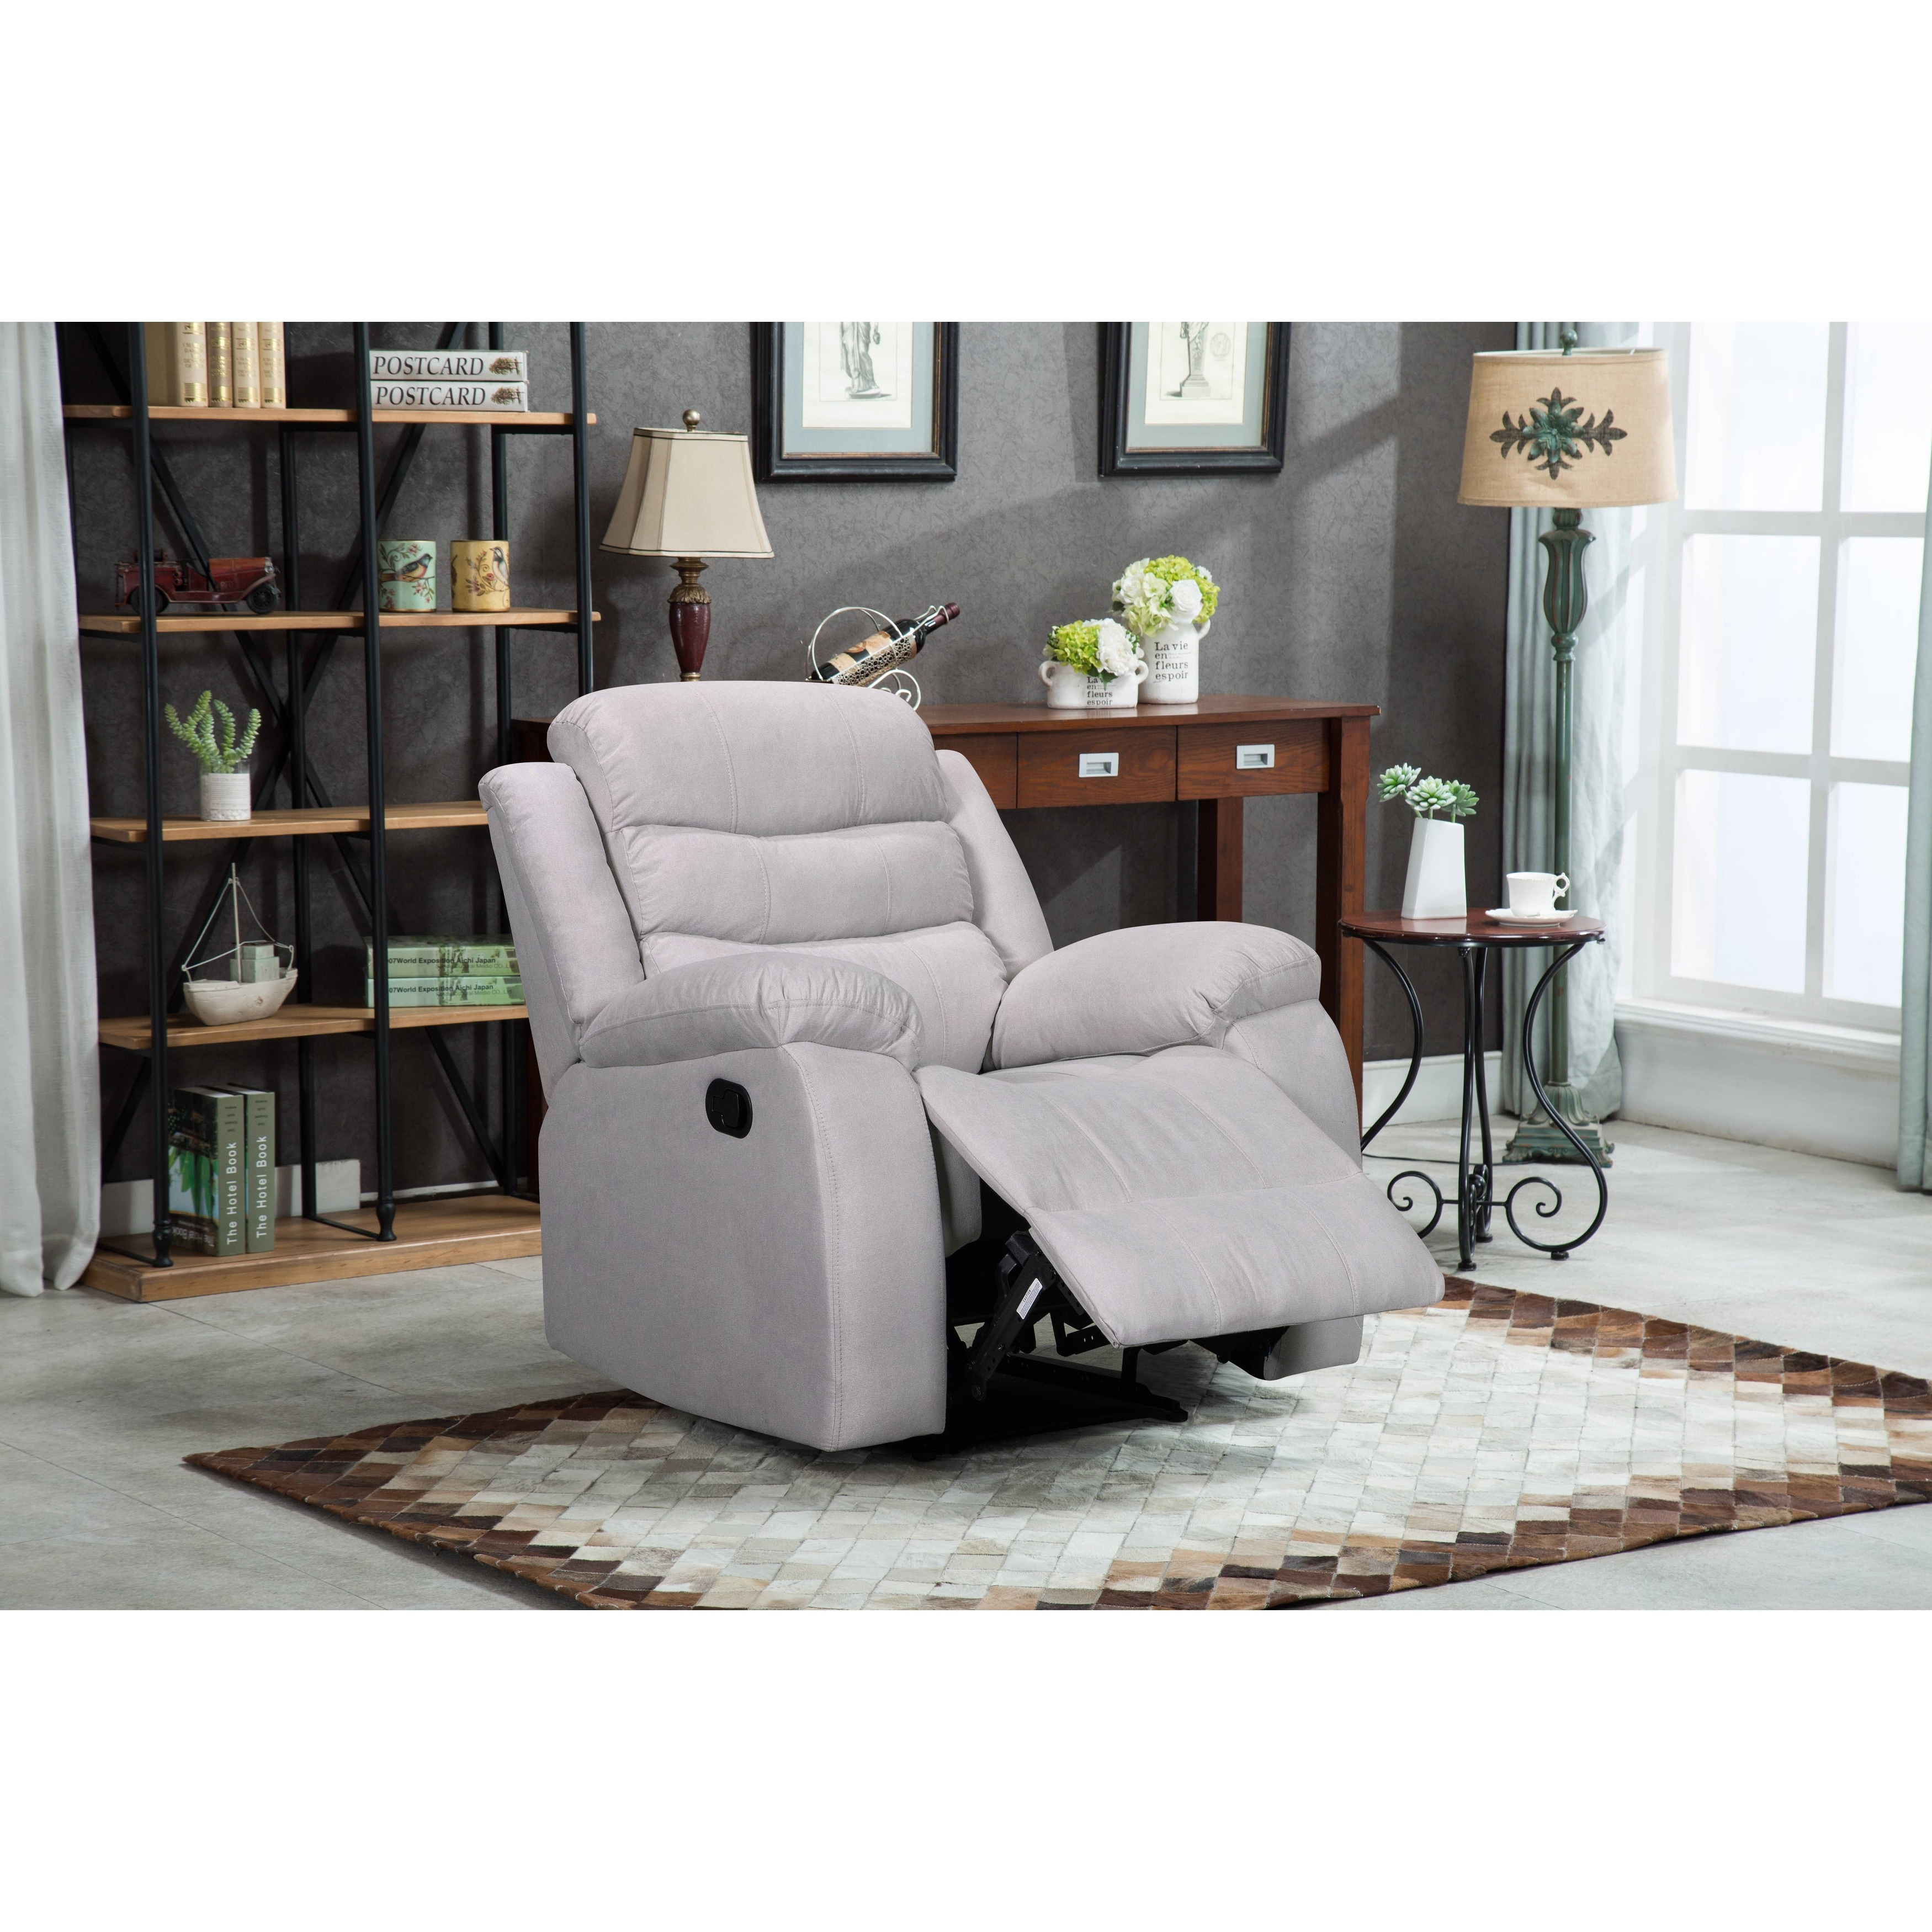  Homall Recliner Chair, Recliner Sofa PU Leather for Adults,  Recliners Home Theater Seating with Lumbar Support, Reclining Sofa Chair  for Living Room (Grey, Leather) : Home & Kitchen